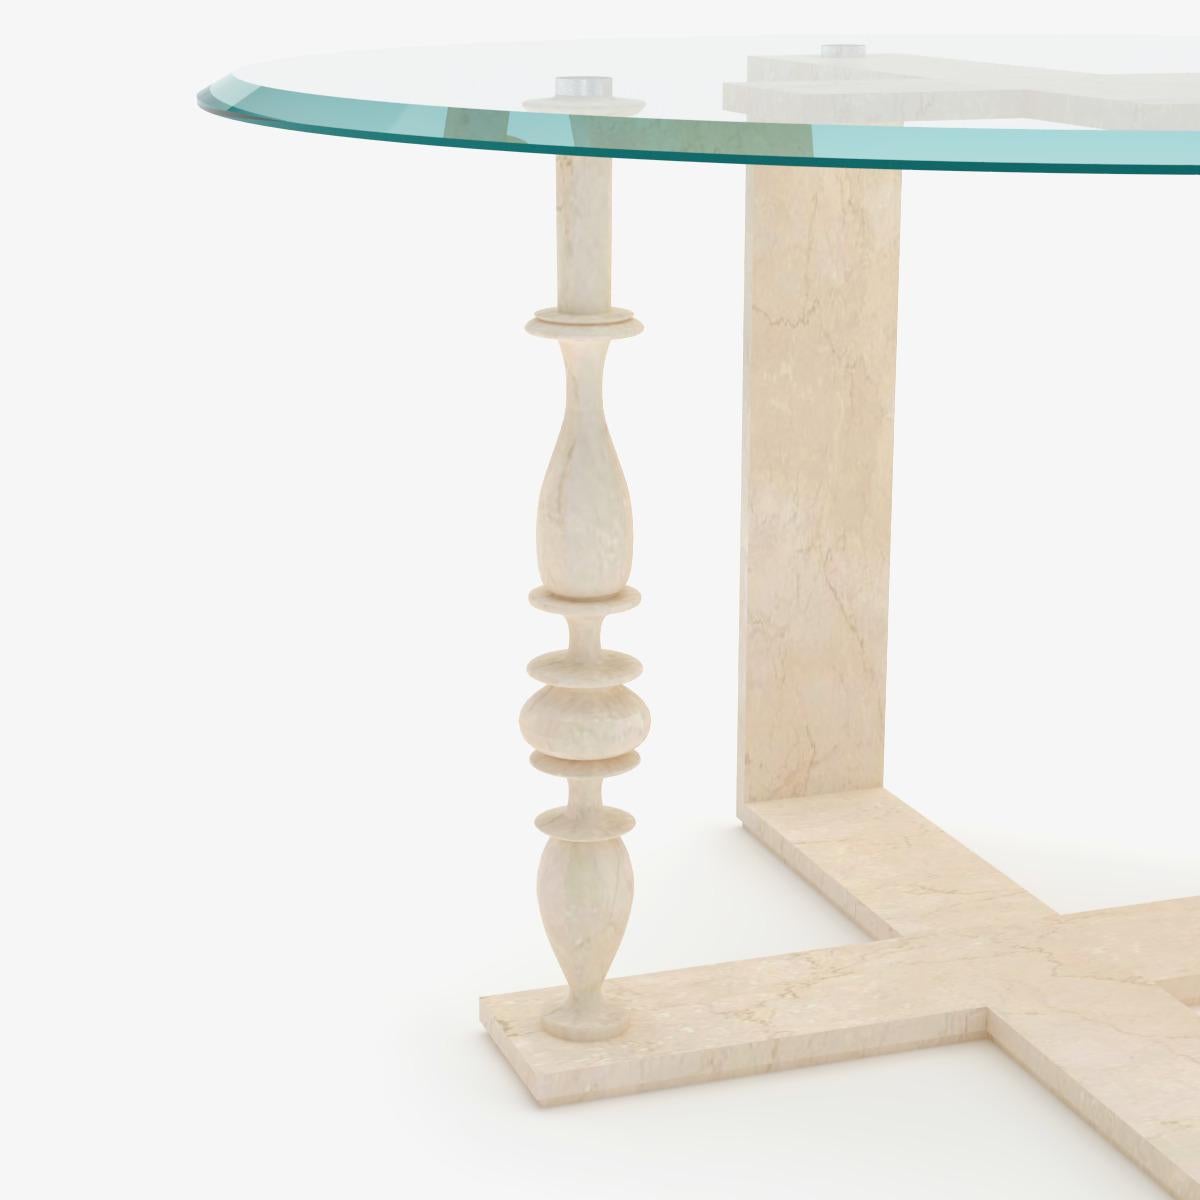 The main feature of the Columnus Frame table is given by the table legs, made entirely of Bianco Veselye marble, which take the shape of a column and therefore outline a classic style. 

The two opposite legs, which are simple and linear, create a